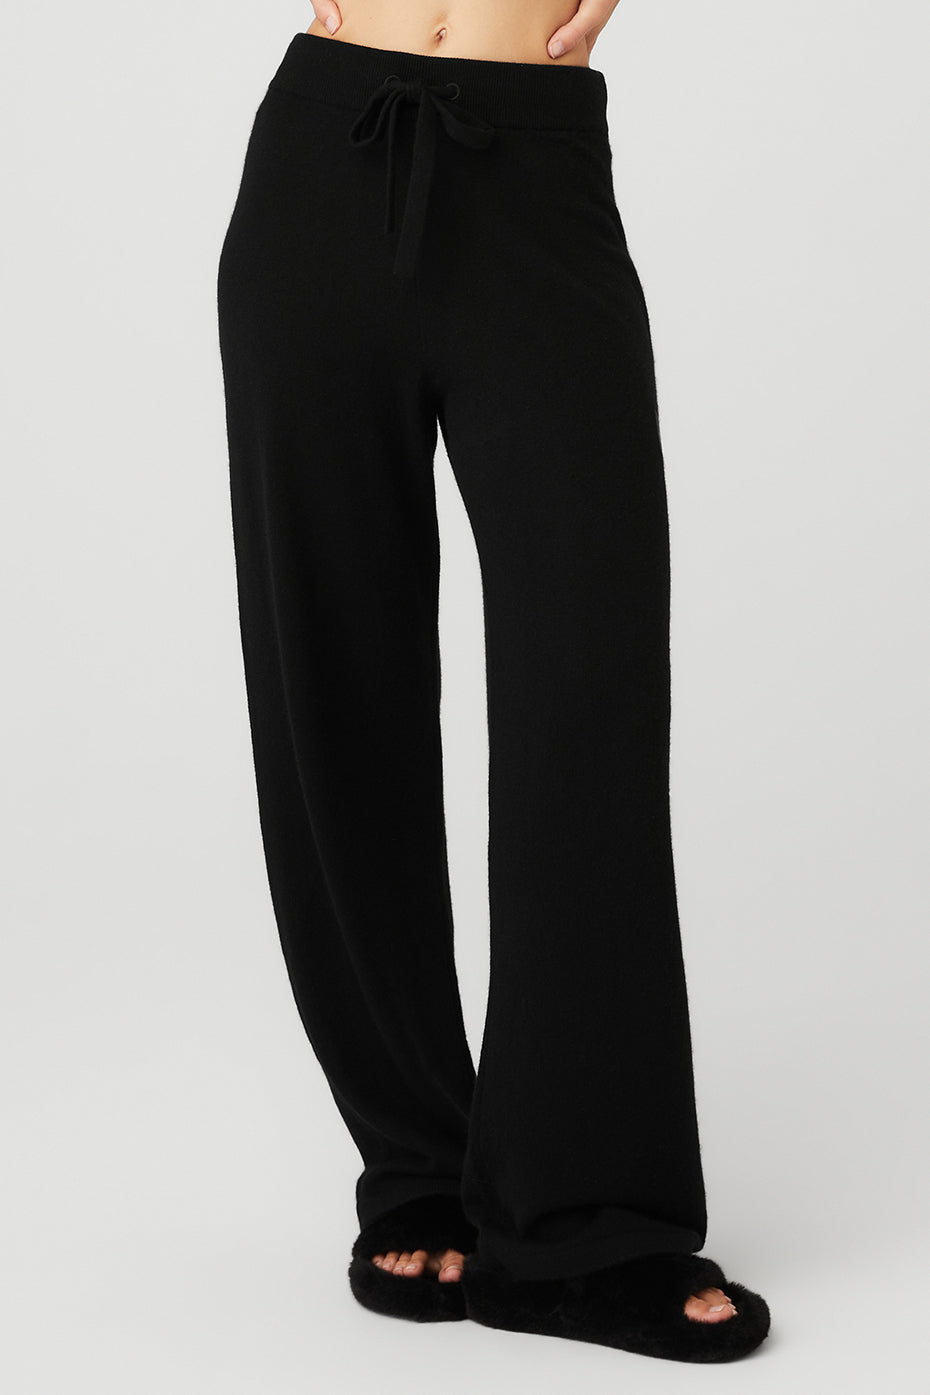 Accolade Straight Leg Sweatpant  Bold jackets, Sweatpants, Airport outfit  winter